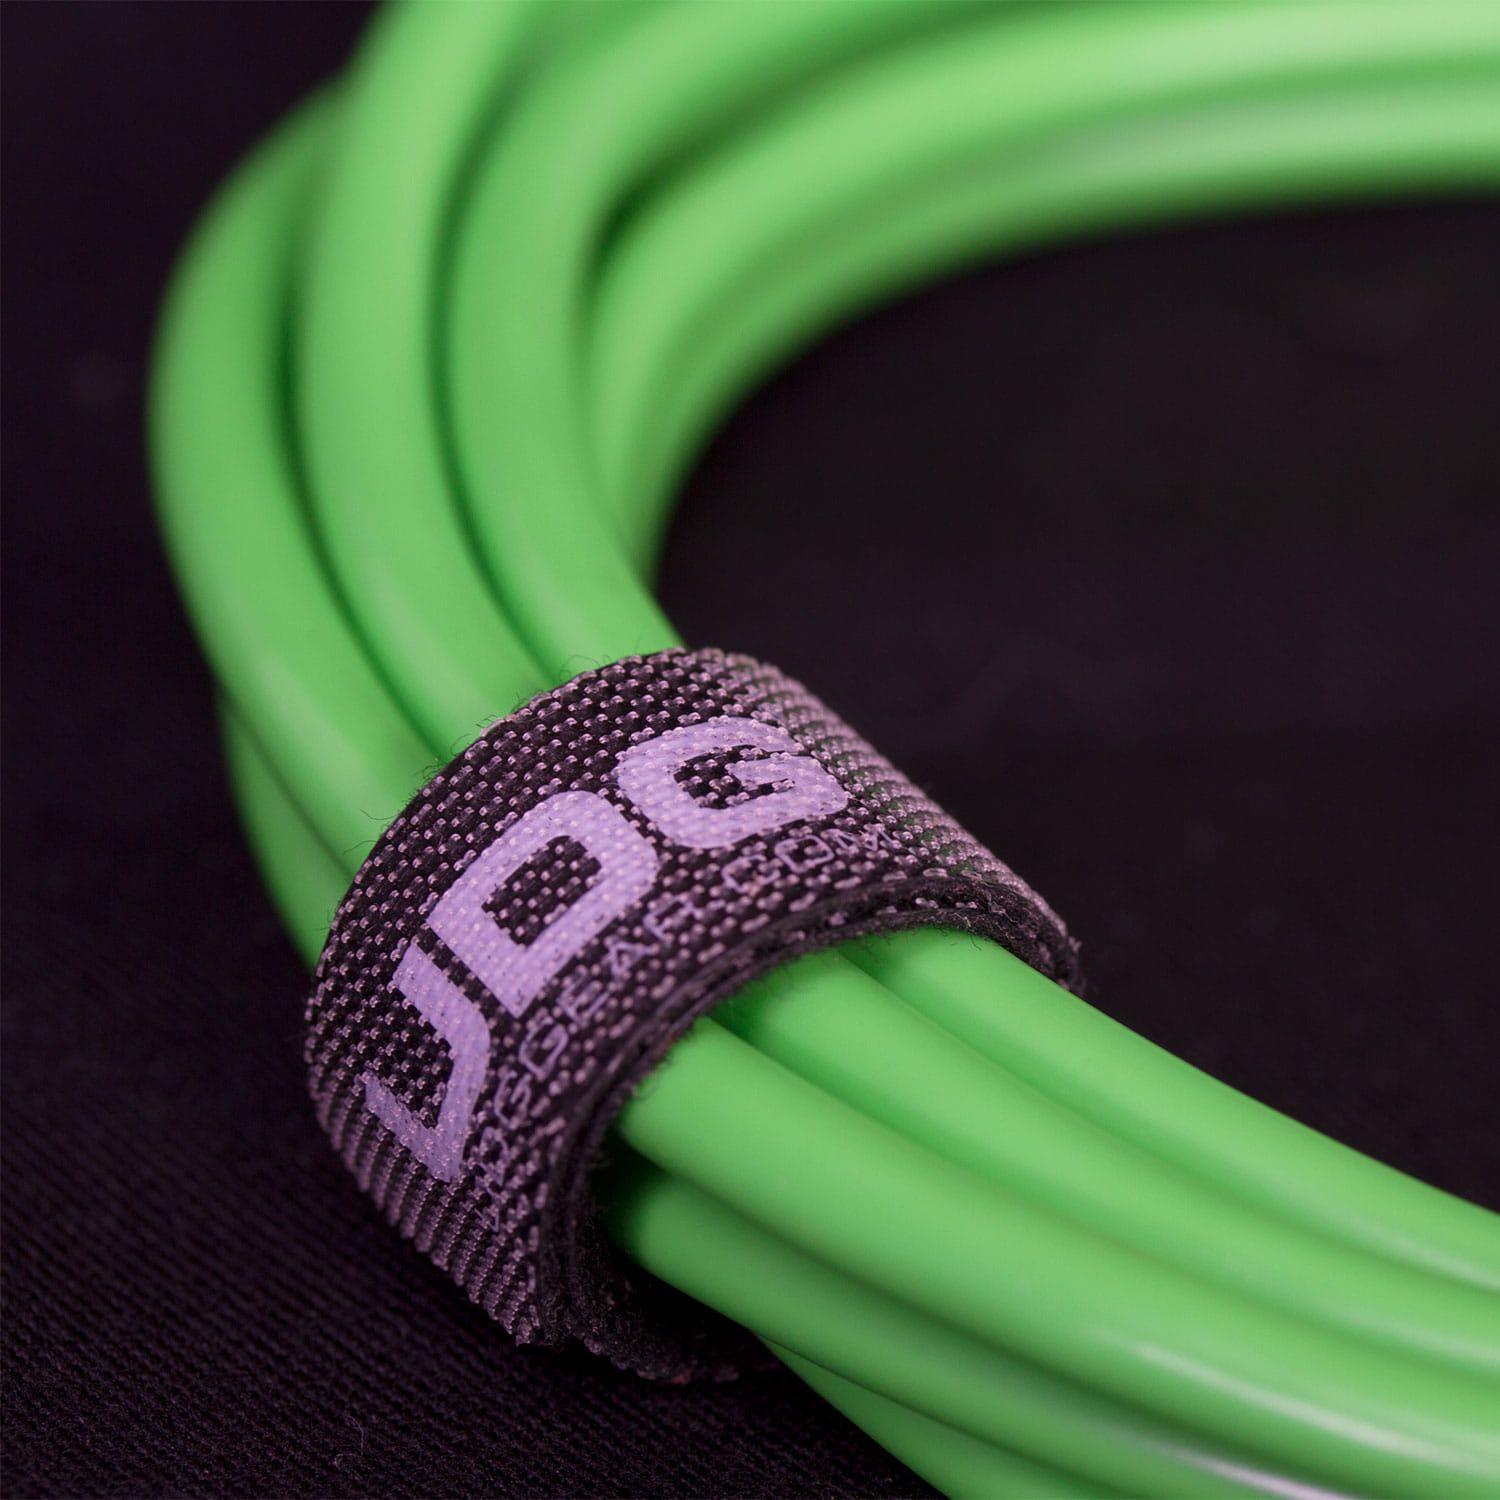 UDG Cable USB 2.0 (Type C-B) Straight 1.5M Green - DY Pro Audio